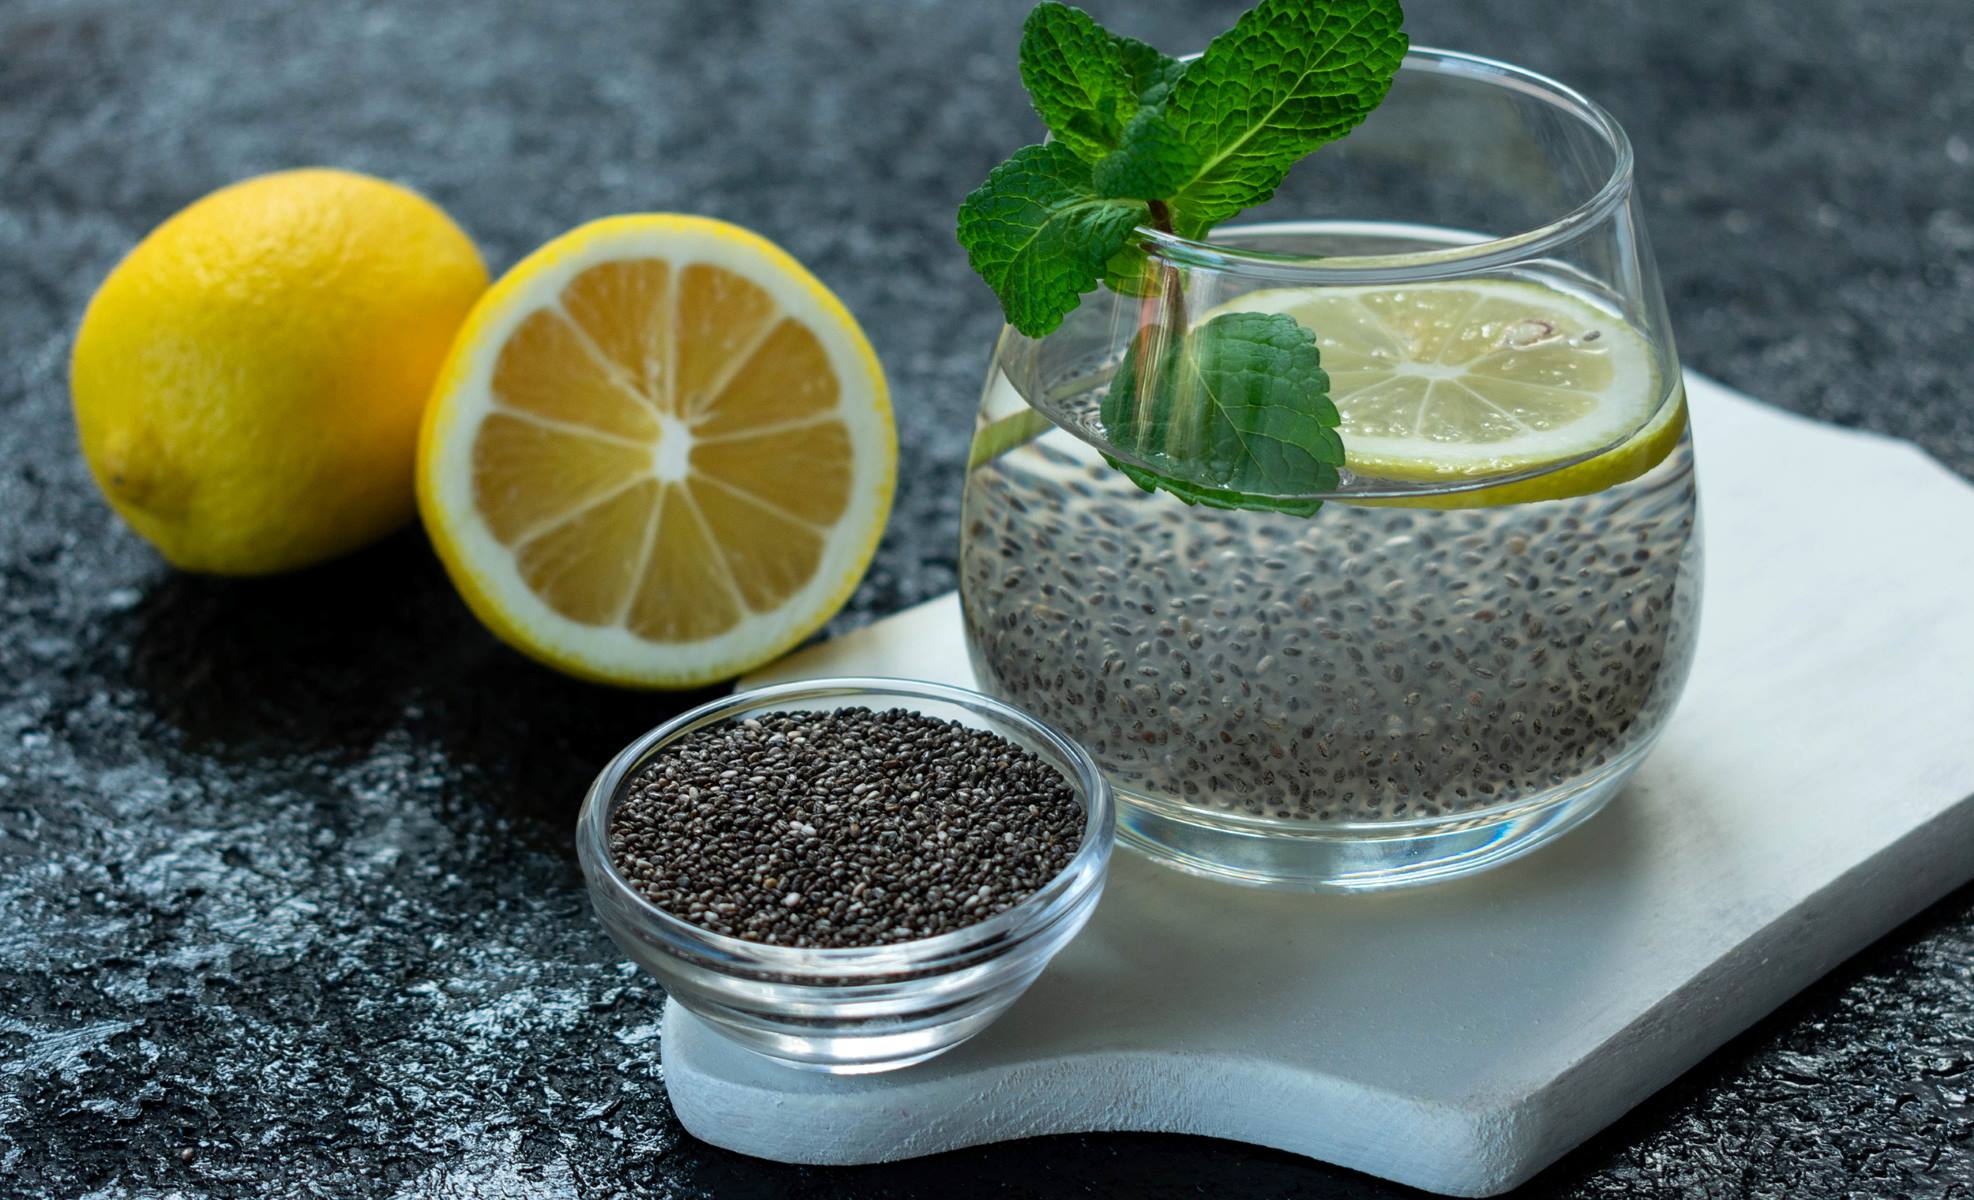 How Long For Chia Seeds To Work